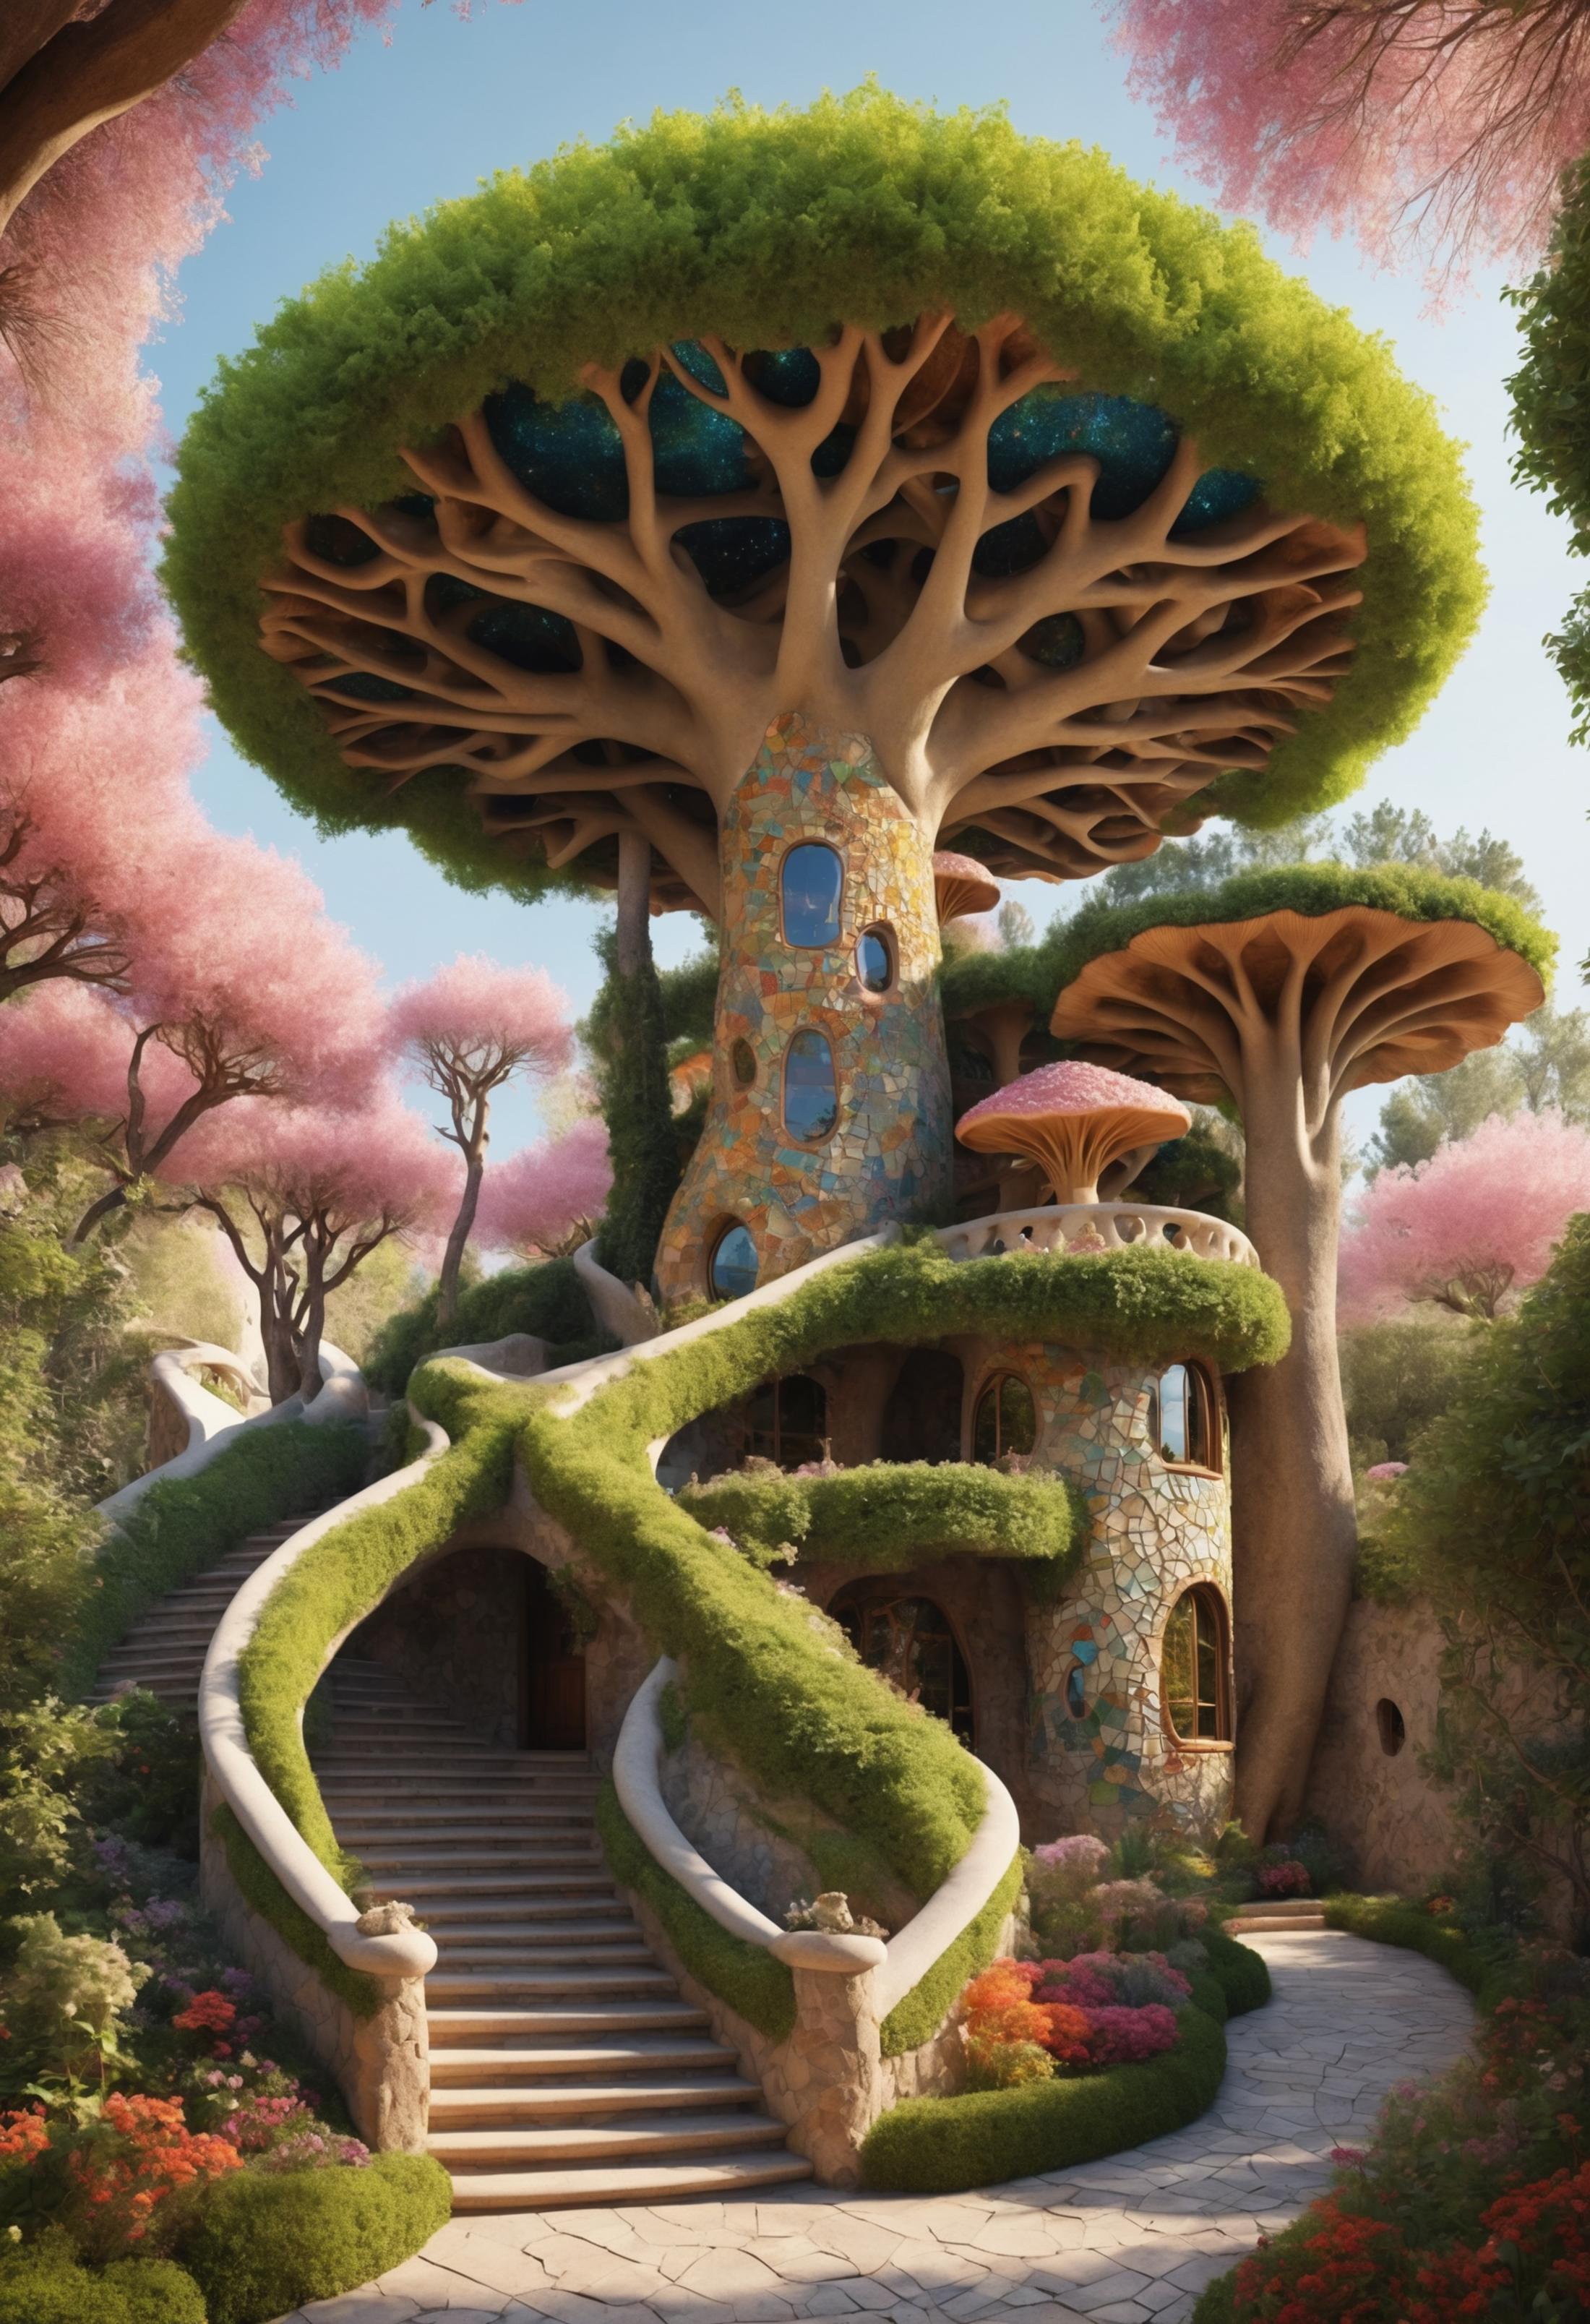 A whimsical treehouse with a spiral staircase and a mossy roof.